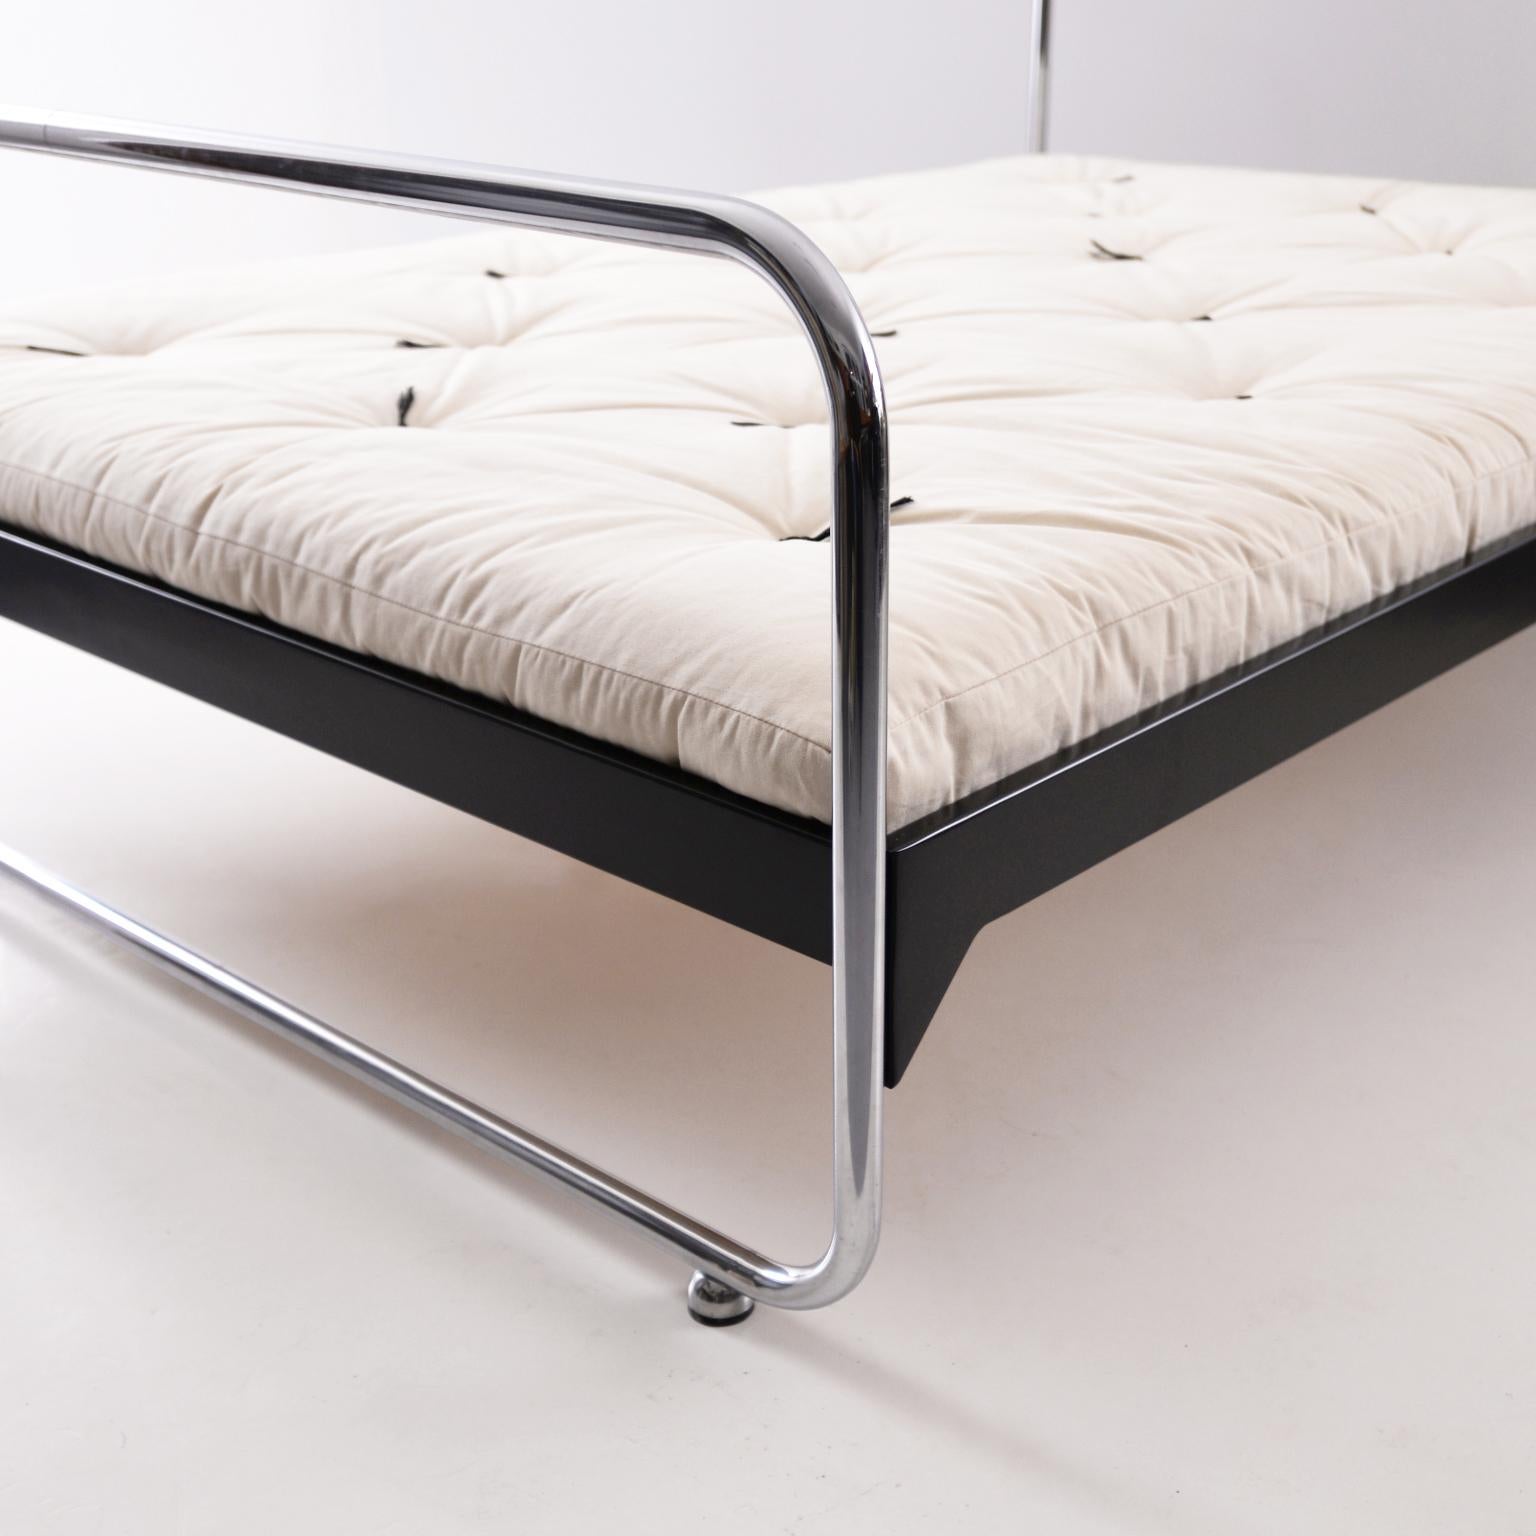 king size bed dimensions in feet